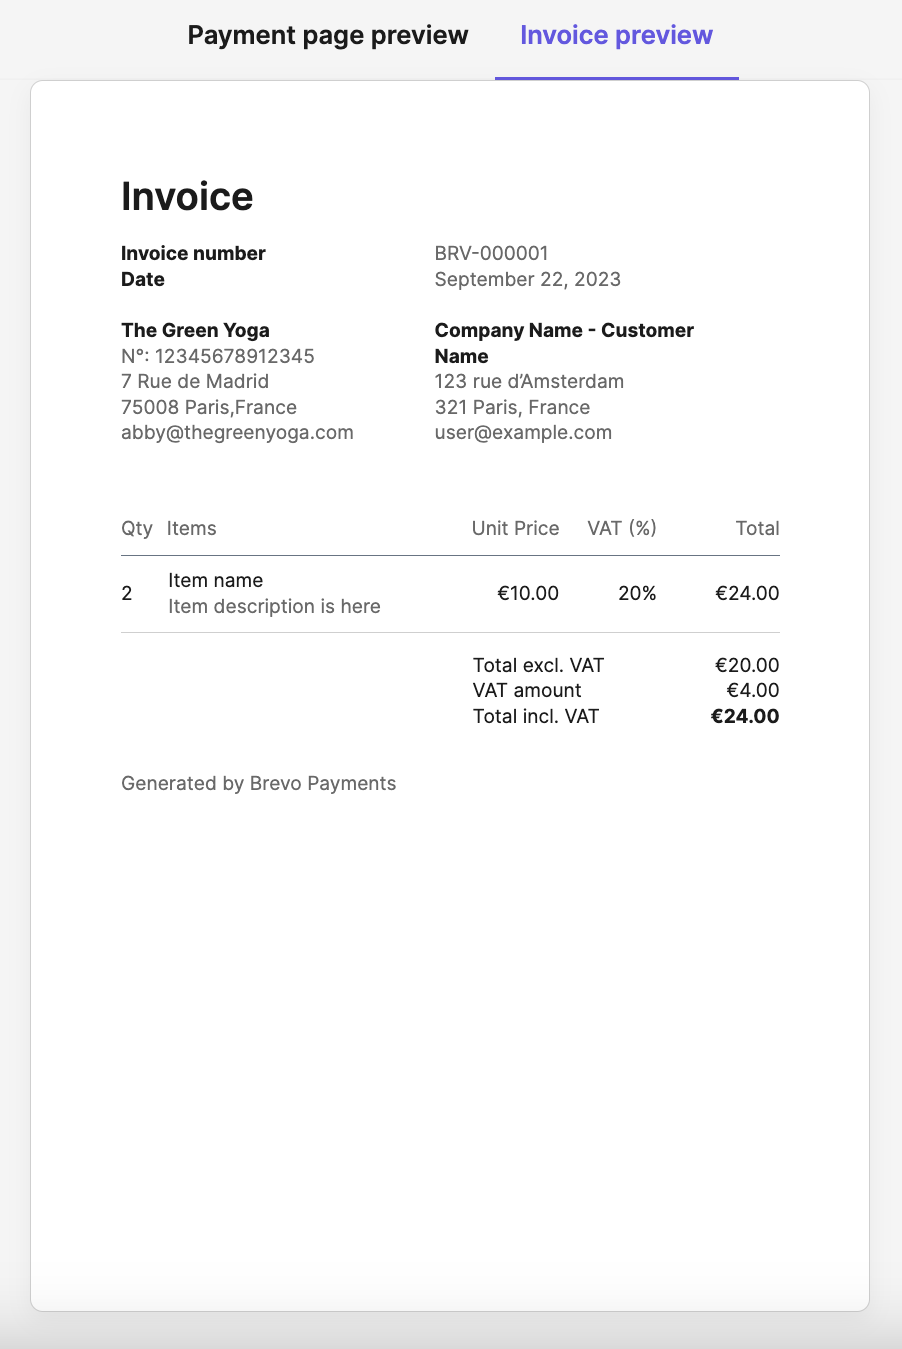 payments_invoice-preview_FR.png